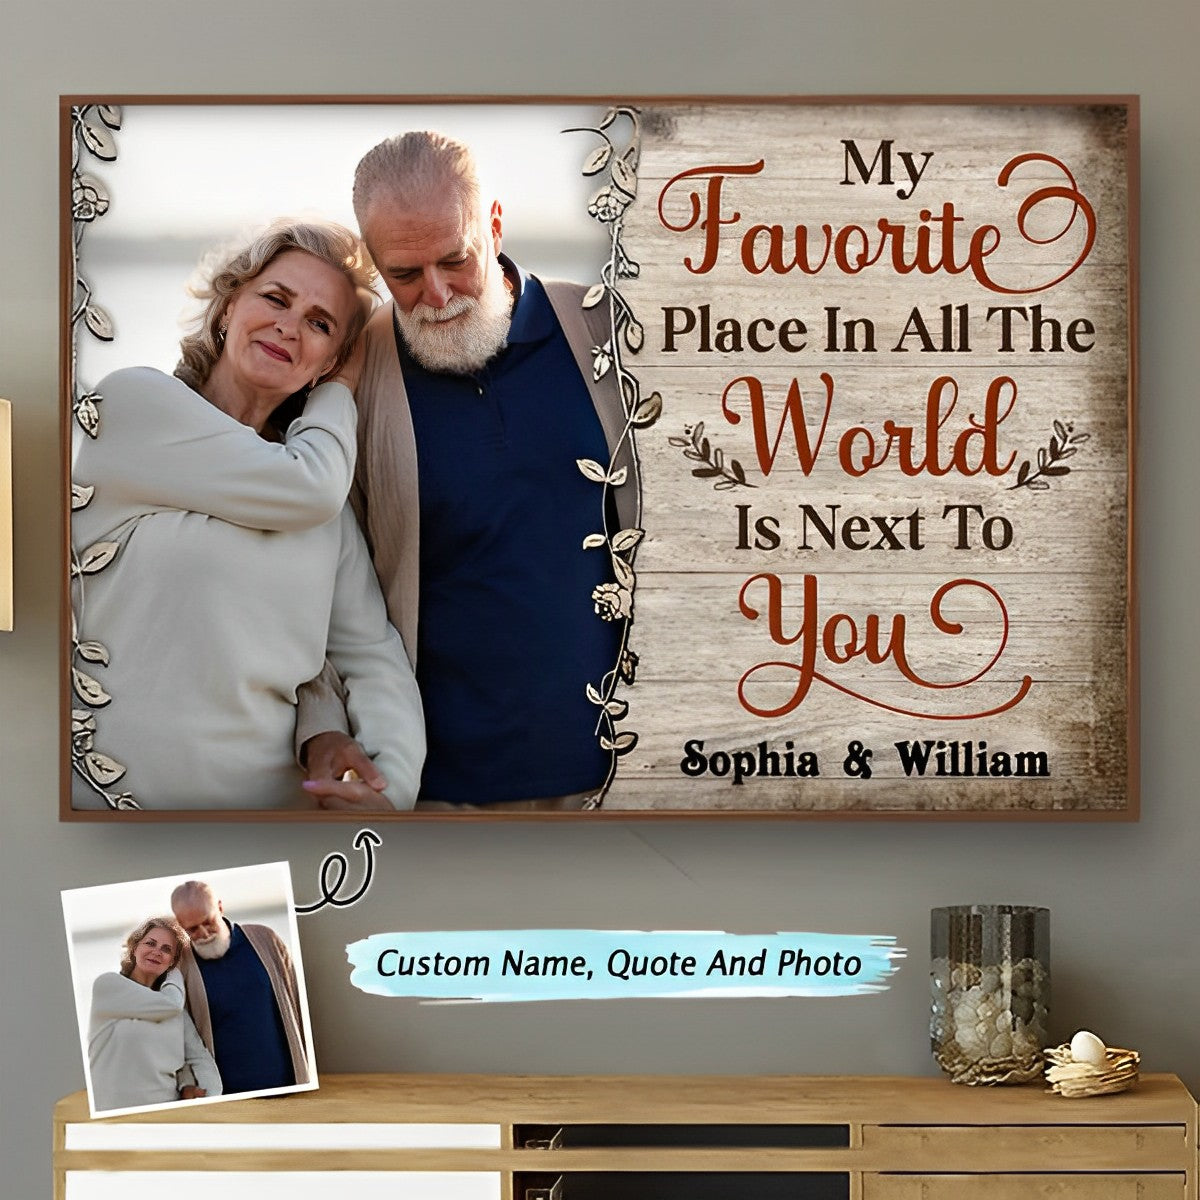 Custom Photo My Favorite Place In All The World Is Next To You - Gift For Couples - Personalized Custom Poster